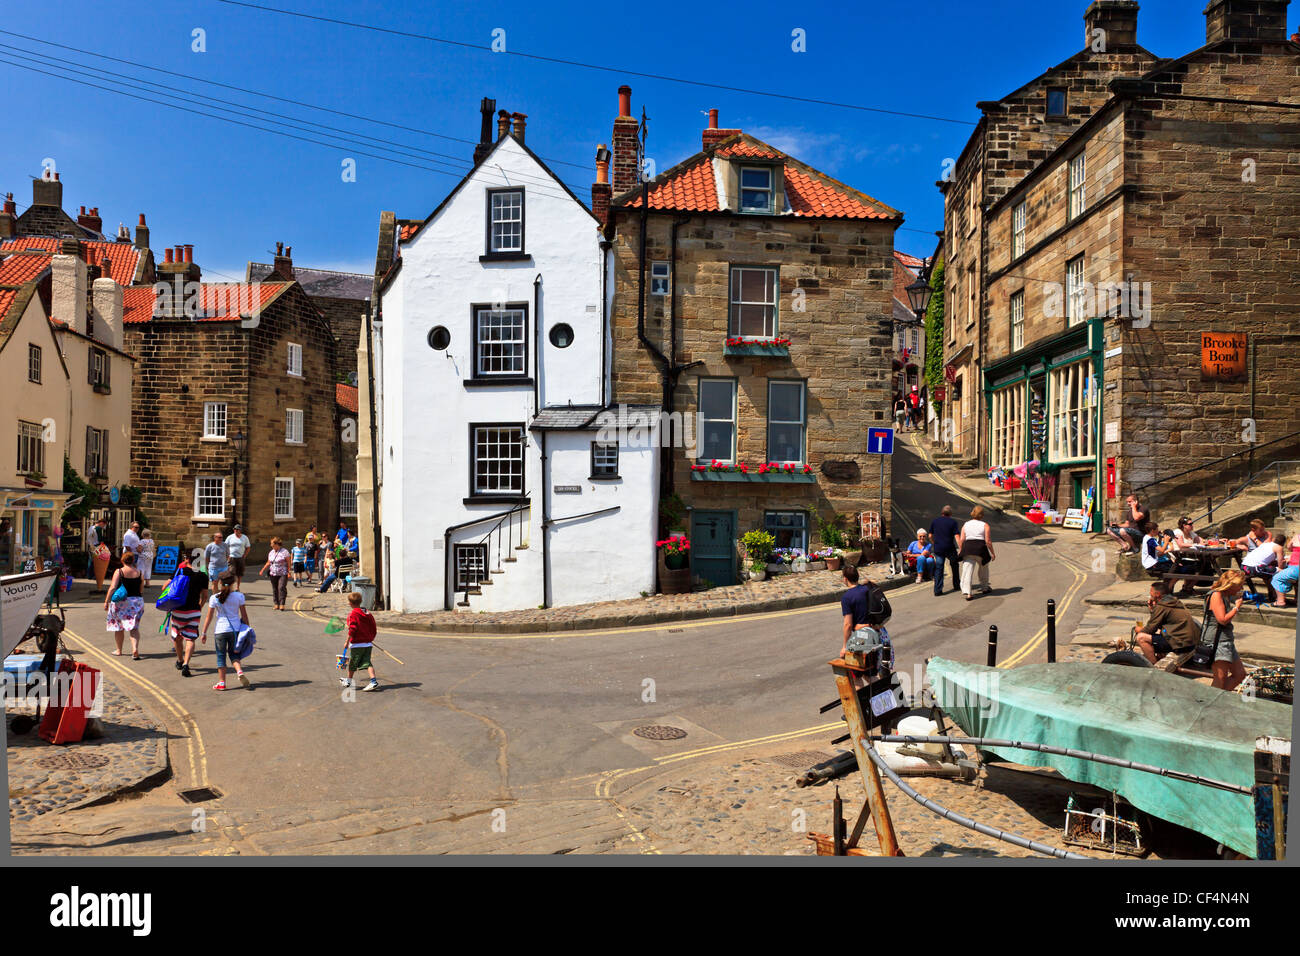 Tourists in the centre of Robin Hood's Bay, the busiest smuggling community on the Yorkshire coast during the 18th century. Stock Photo